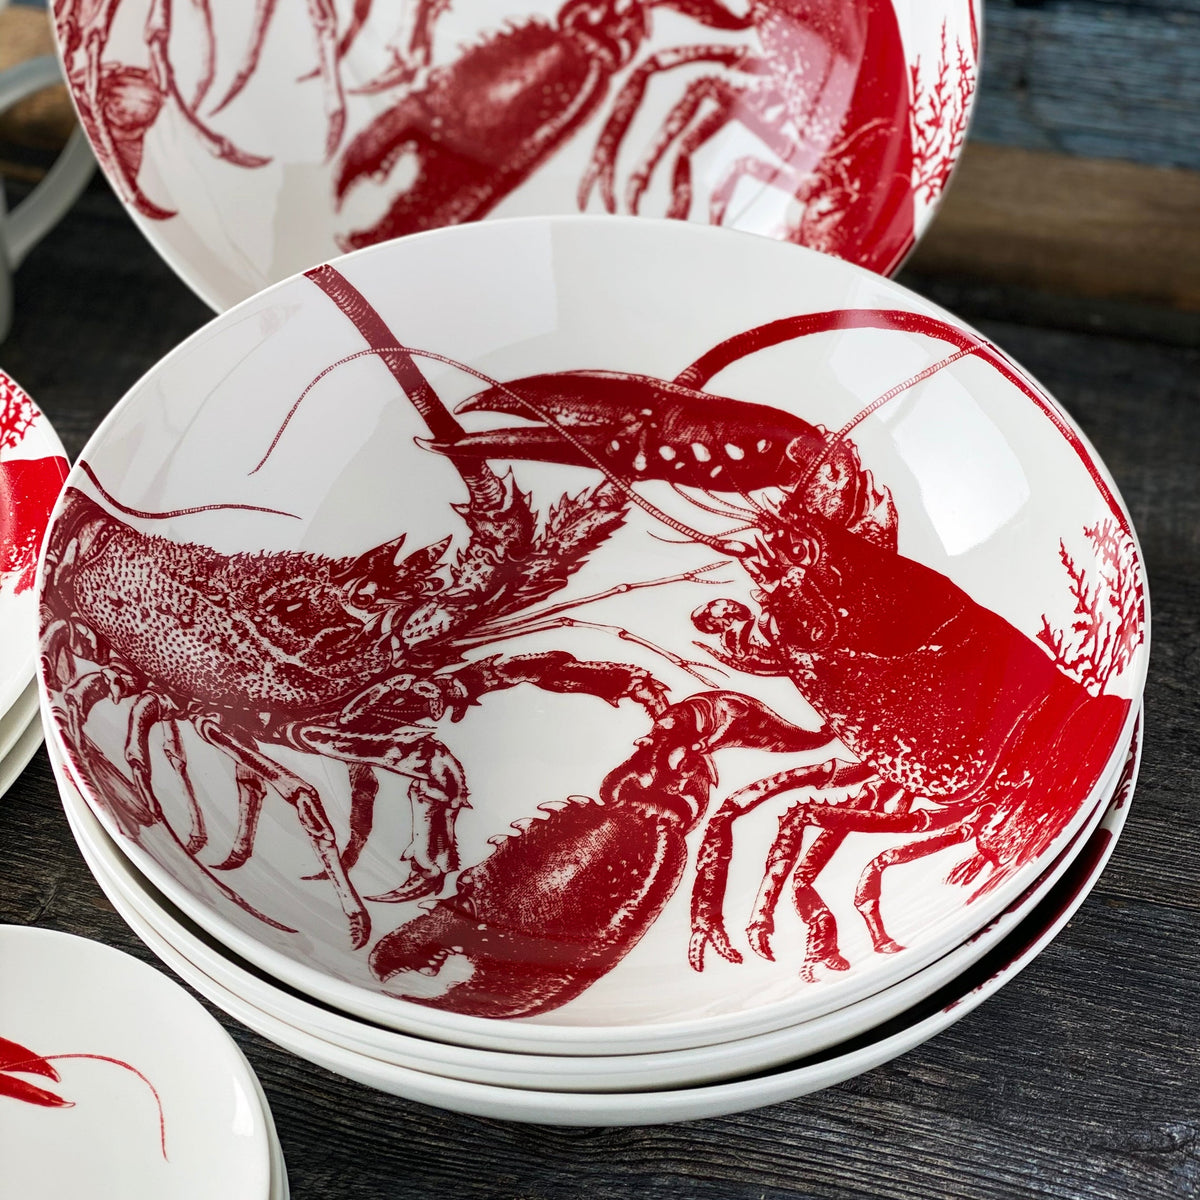 A Complete Clambake 16 pc. Set of red and white plates with lobsters on them, perfect for a clam bake, from Caskata Artisanal Home.